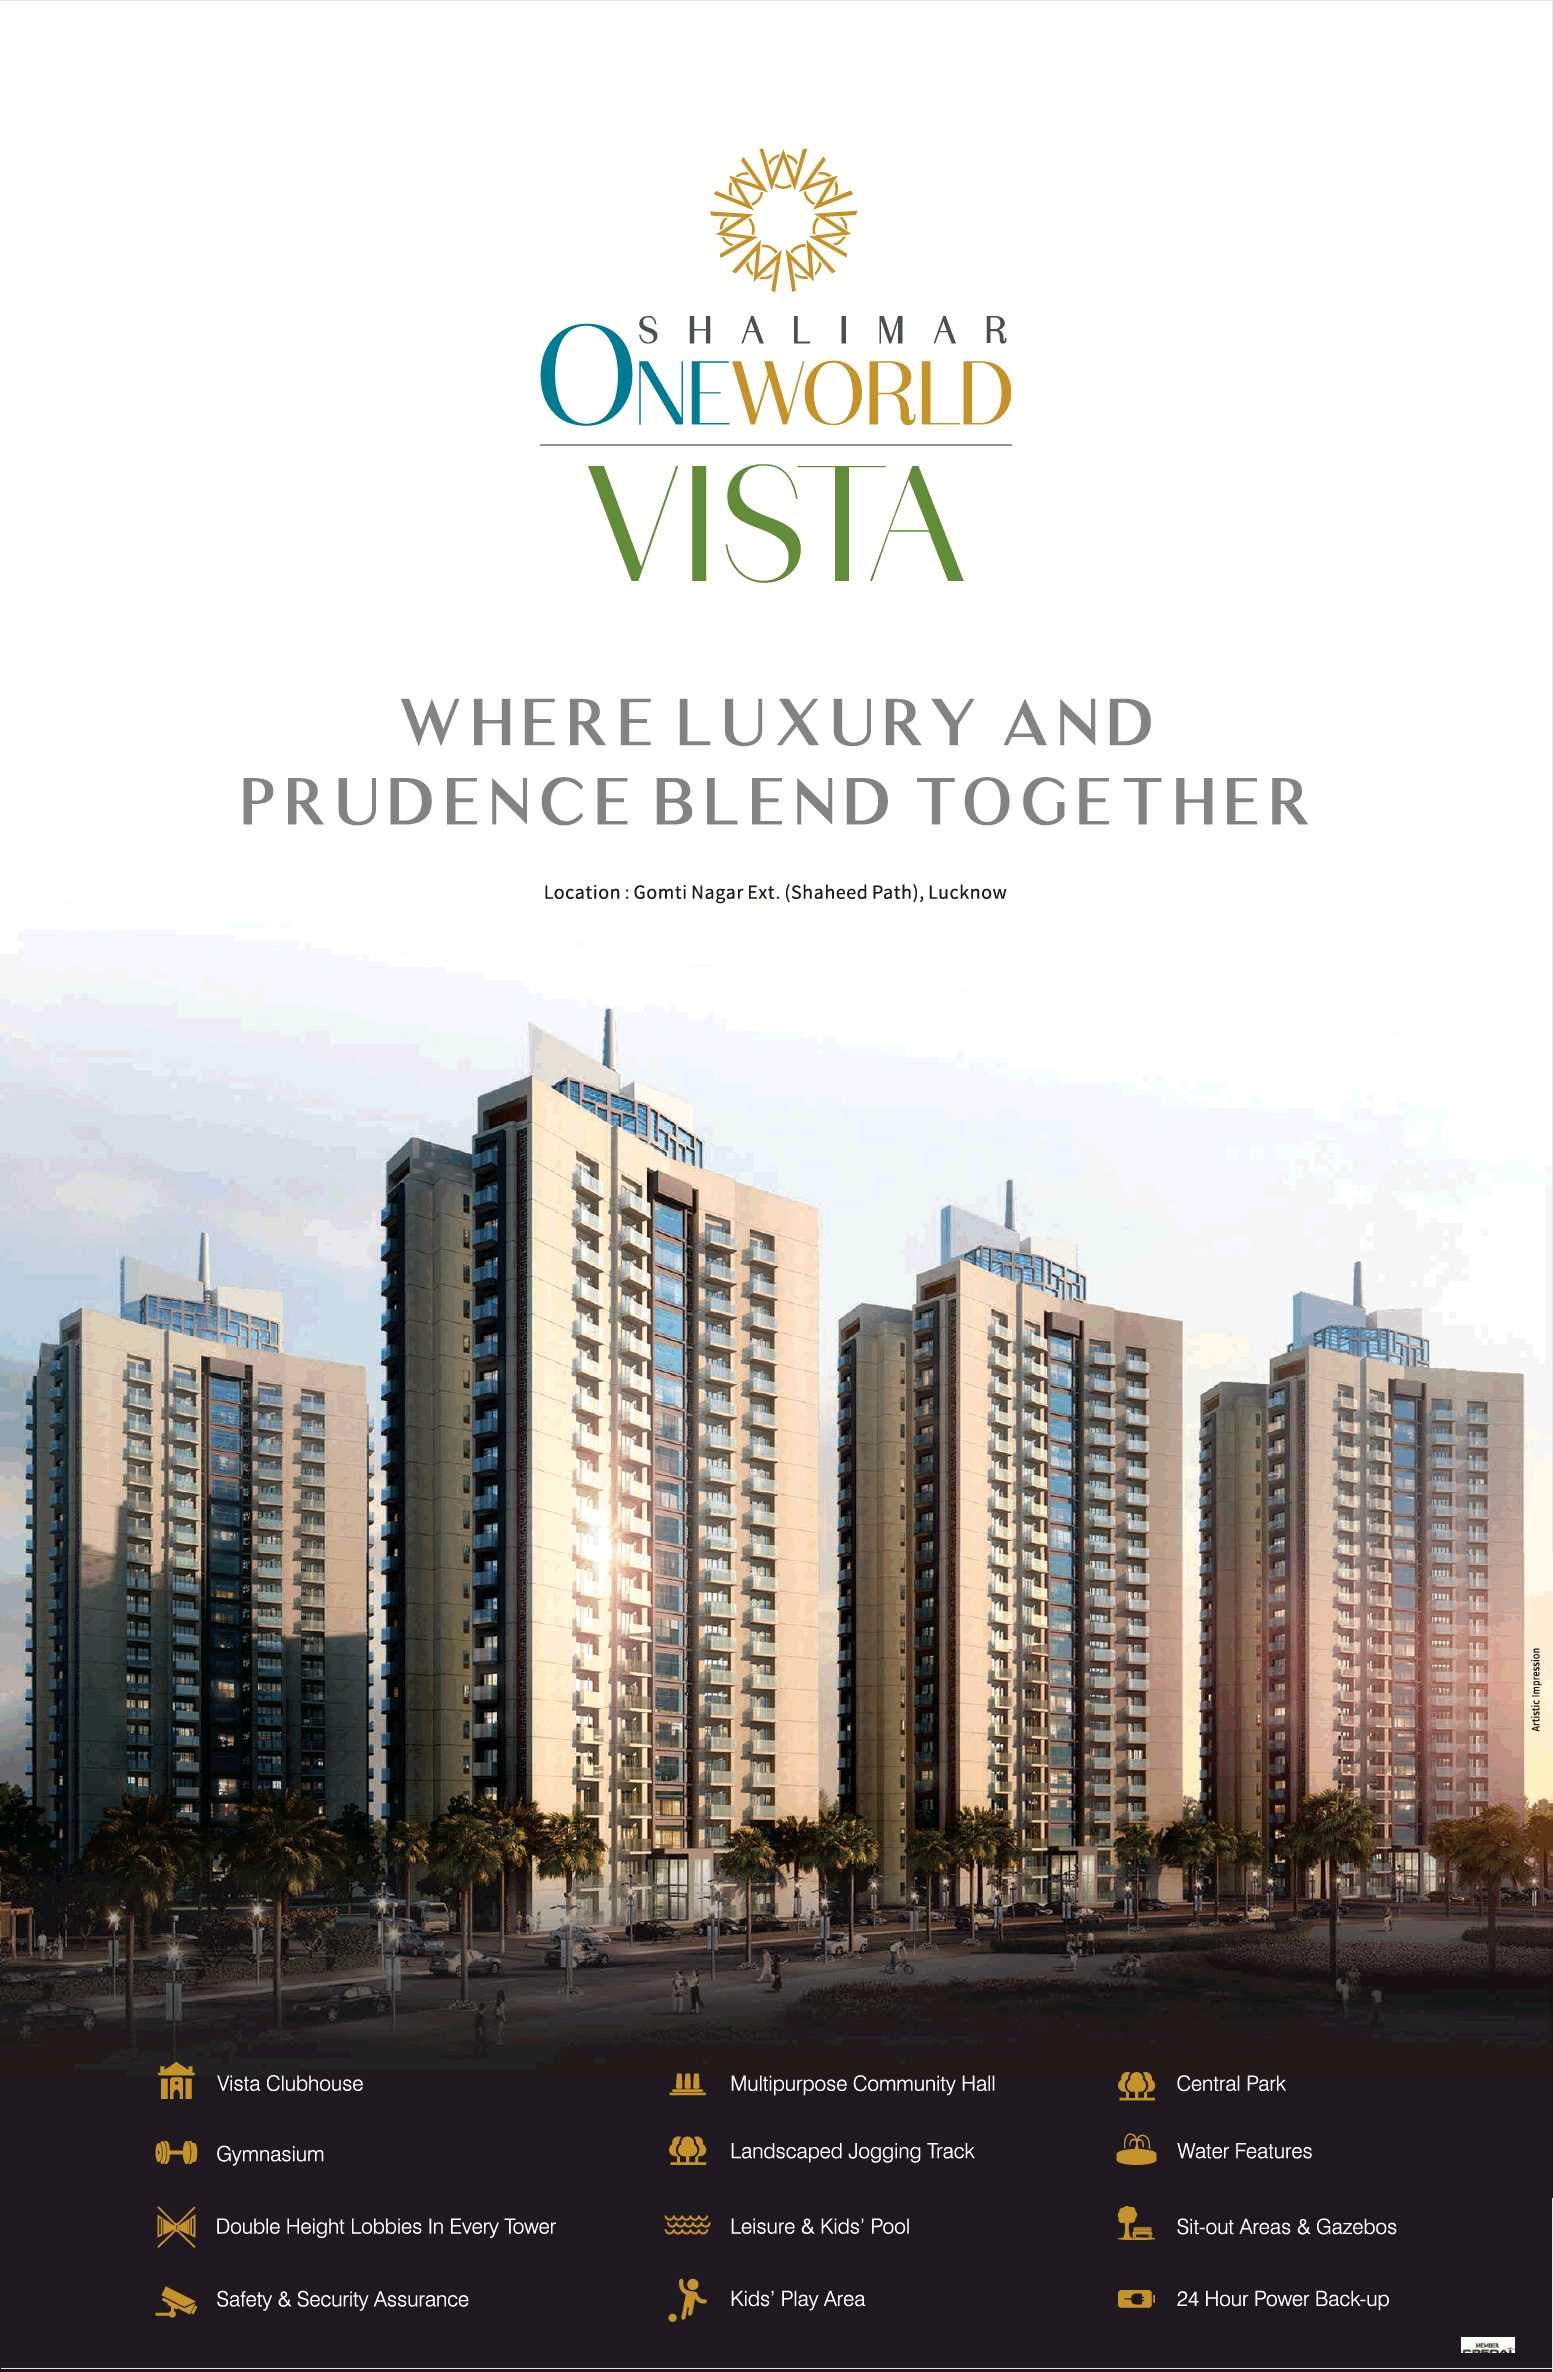 Experience luxury & prudence blend together at Shalimar One World Vista in Lucknow Update